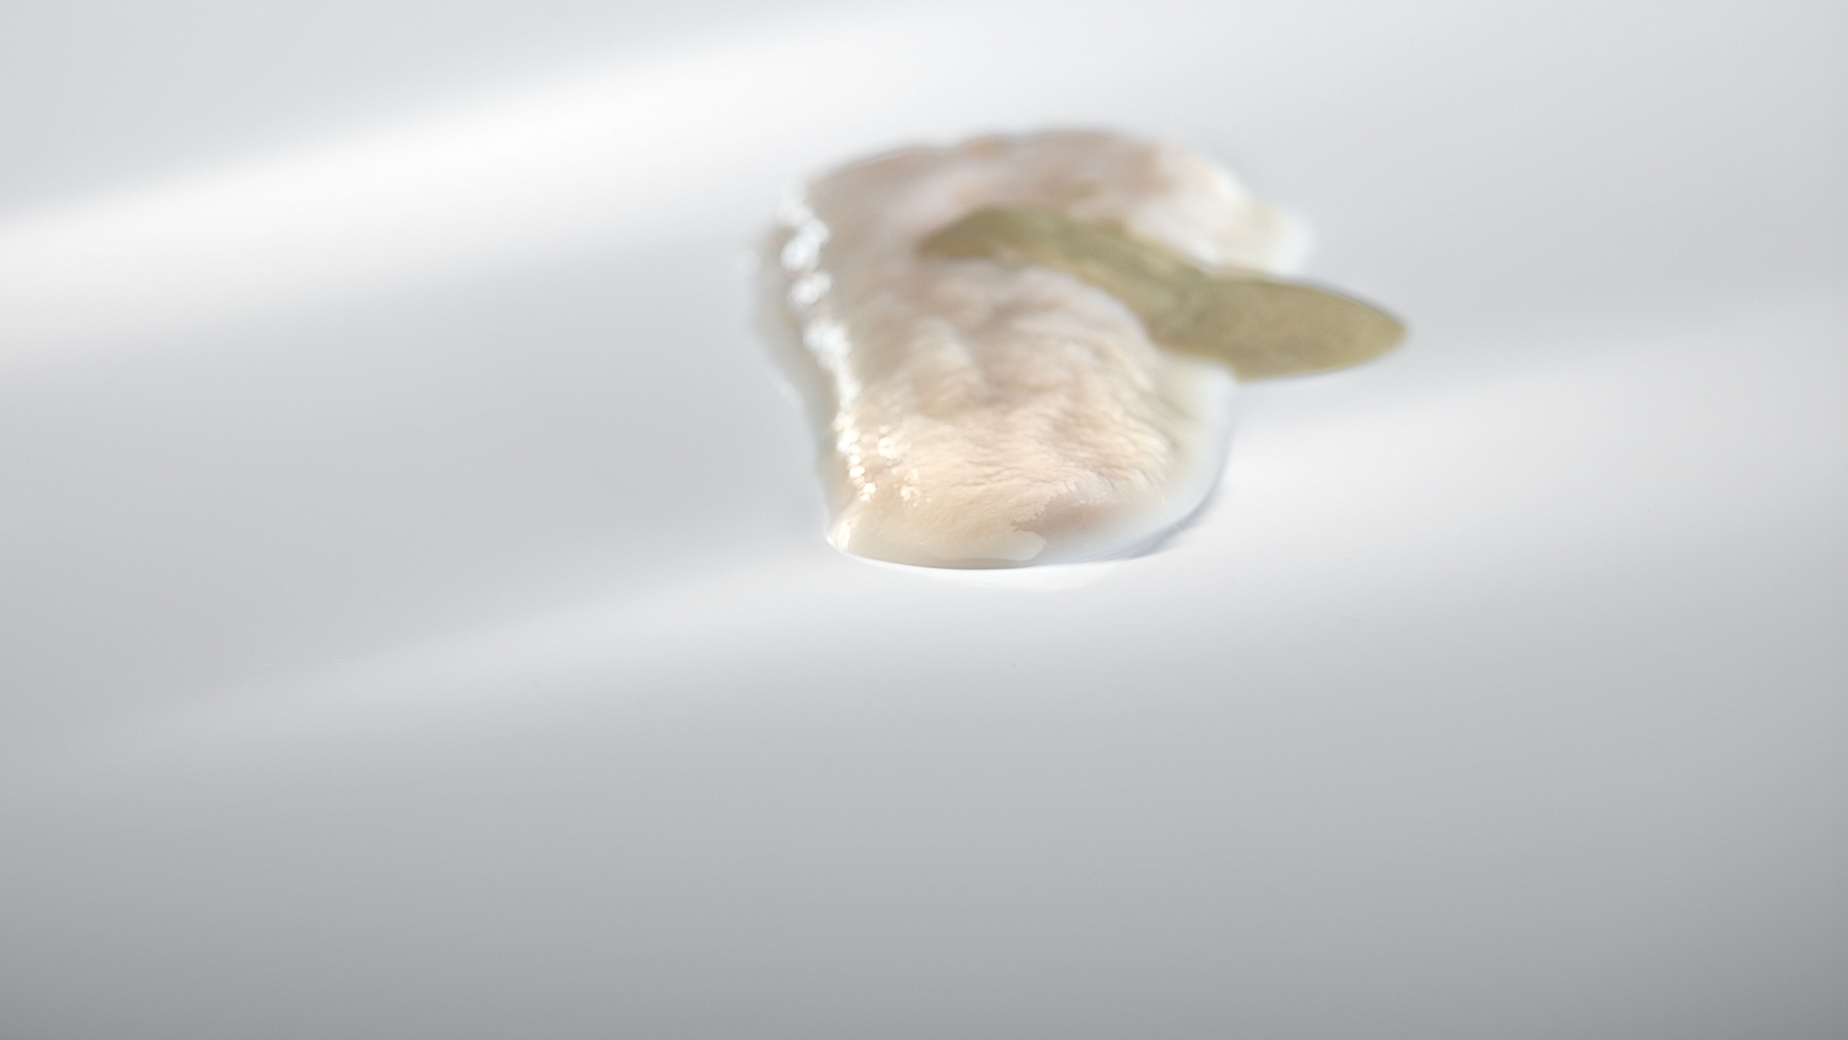 Portion of hake and milky reduction of stewed turnip sprouts. Citric cream and salt grains.
PHOTO: José Luis López de Zubiría / Mugaritz